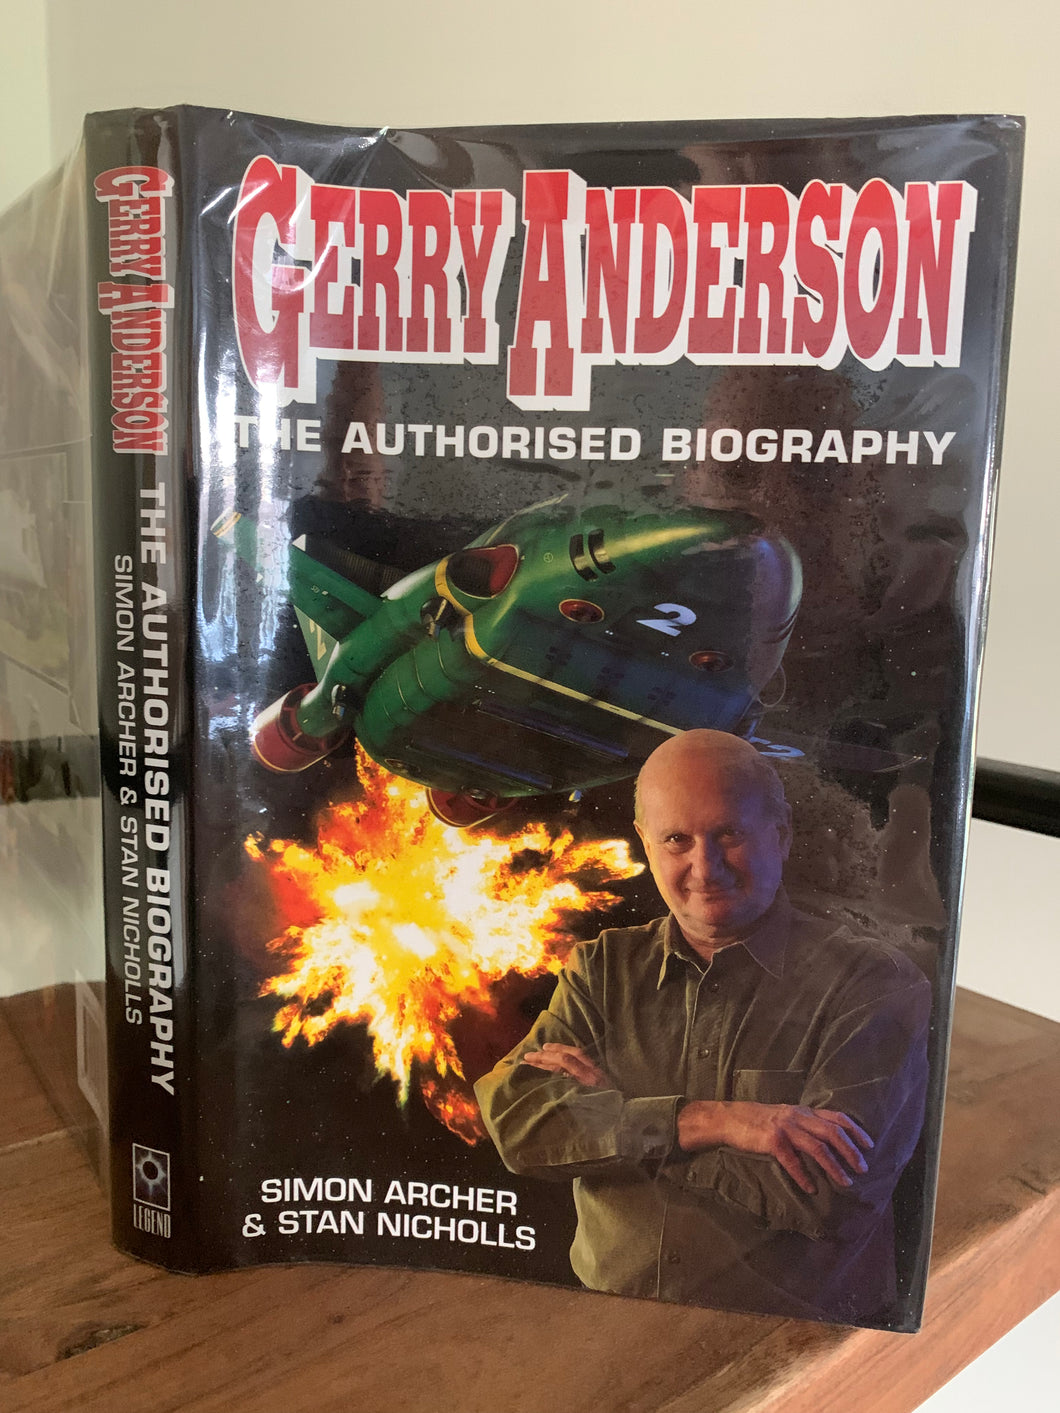 Gerry Anderson - The Authorised Biography (signed)